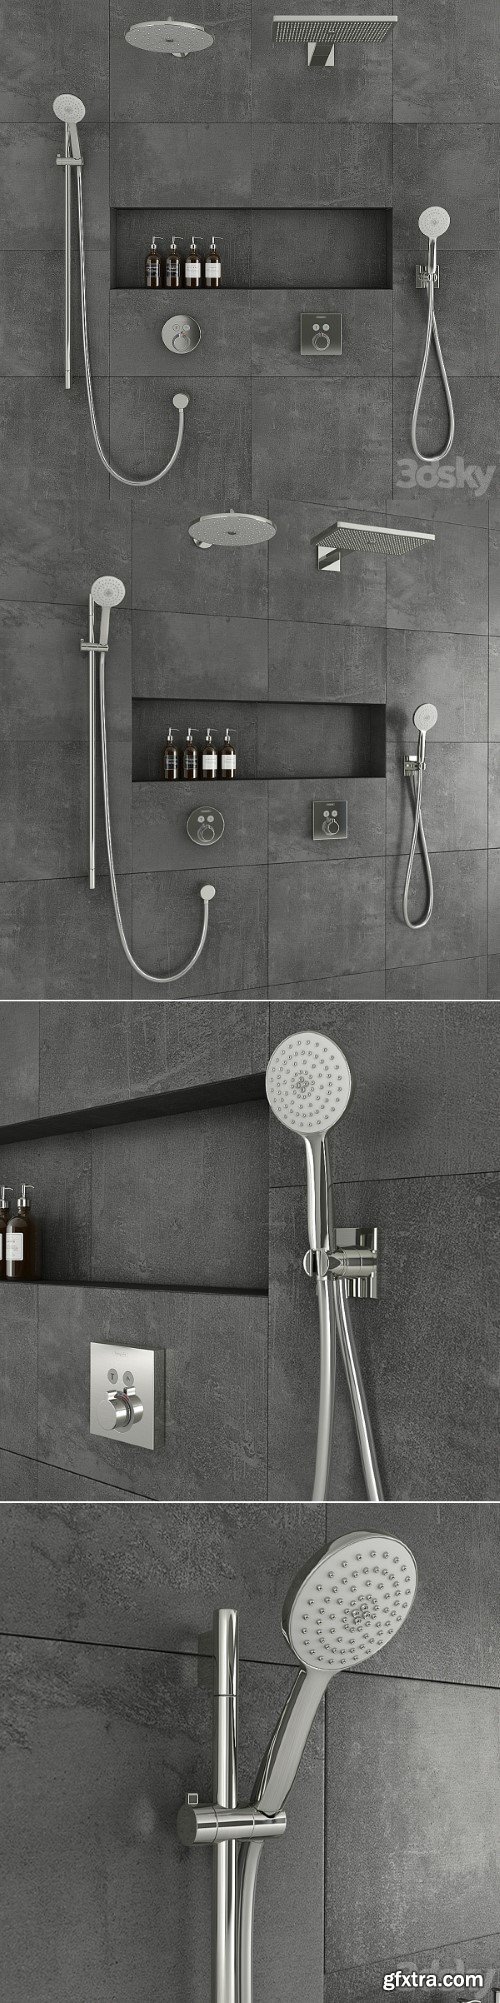 Hansgrohe shower system | Vray